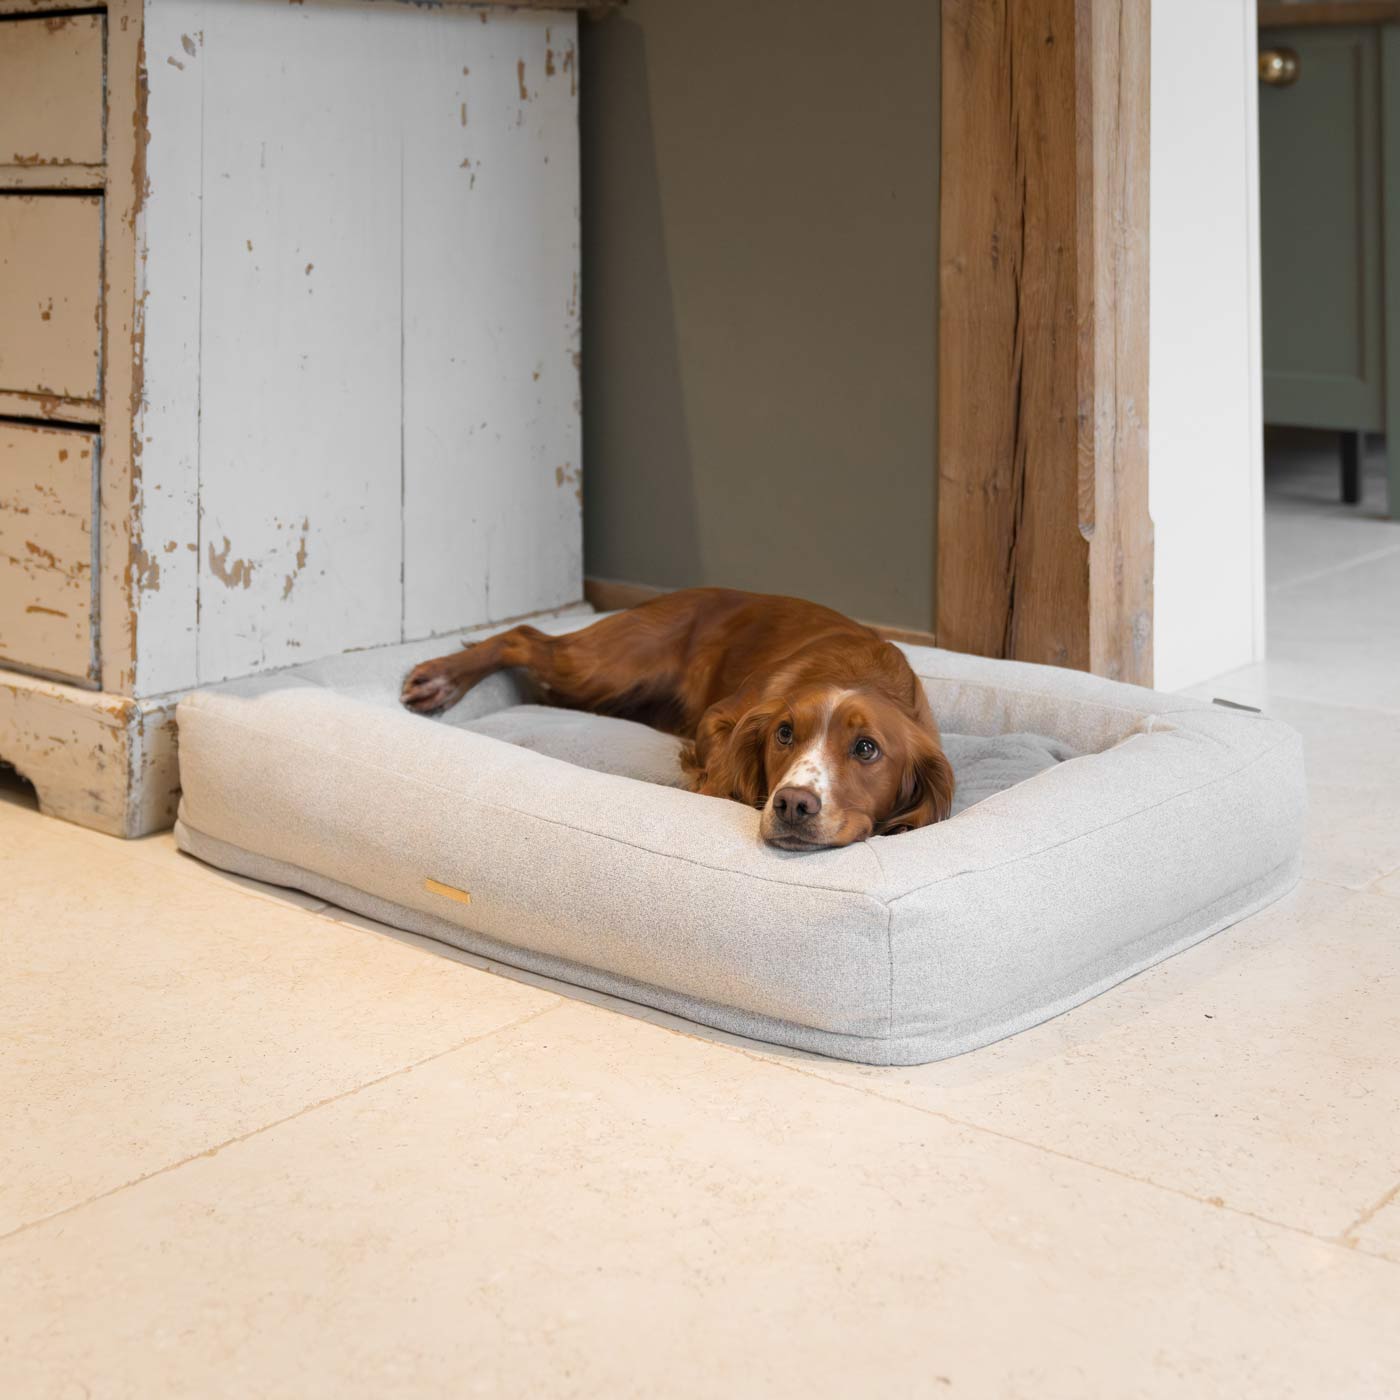 Discover Our Luxurious Comfort Cube Dog Bed in Ivory, featuring Removable covers for easy machine washing and a non slip wipeable base. This super soft pet bed offers the ultimate comfort to your furry friend! Bringing Your Canine Companion The Perfect Bed For Dogs To Curl Up To! Available Now at Lords & Labradors US